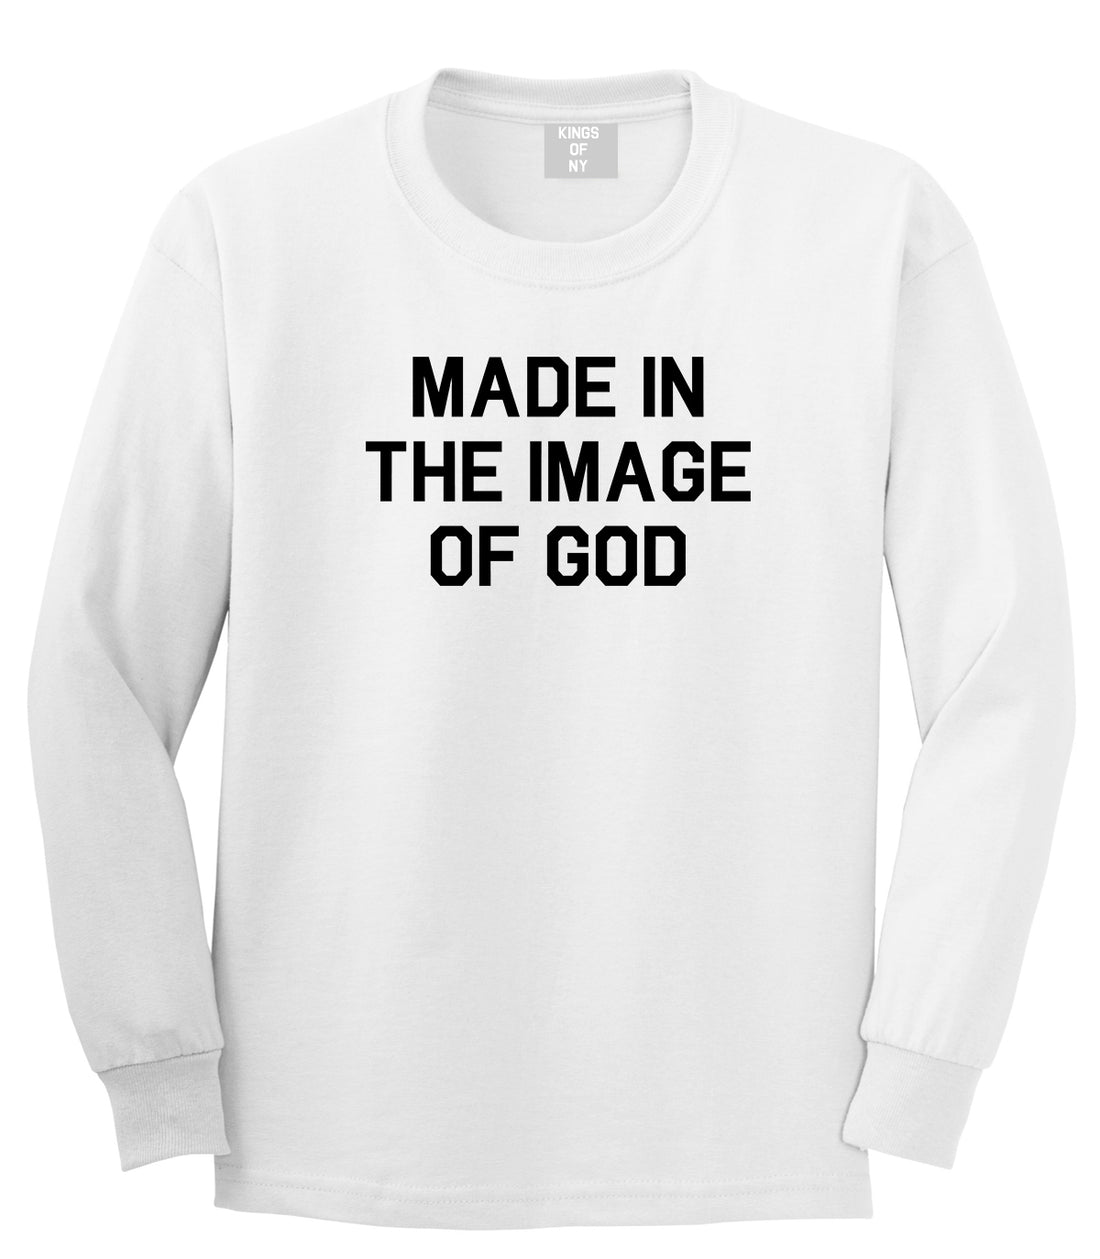 Made In The Image Of God Mens Long Sleeve T-Shirt White by Kings Of NY